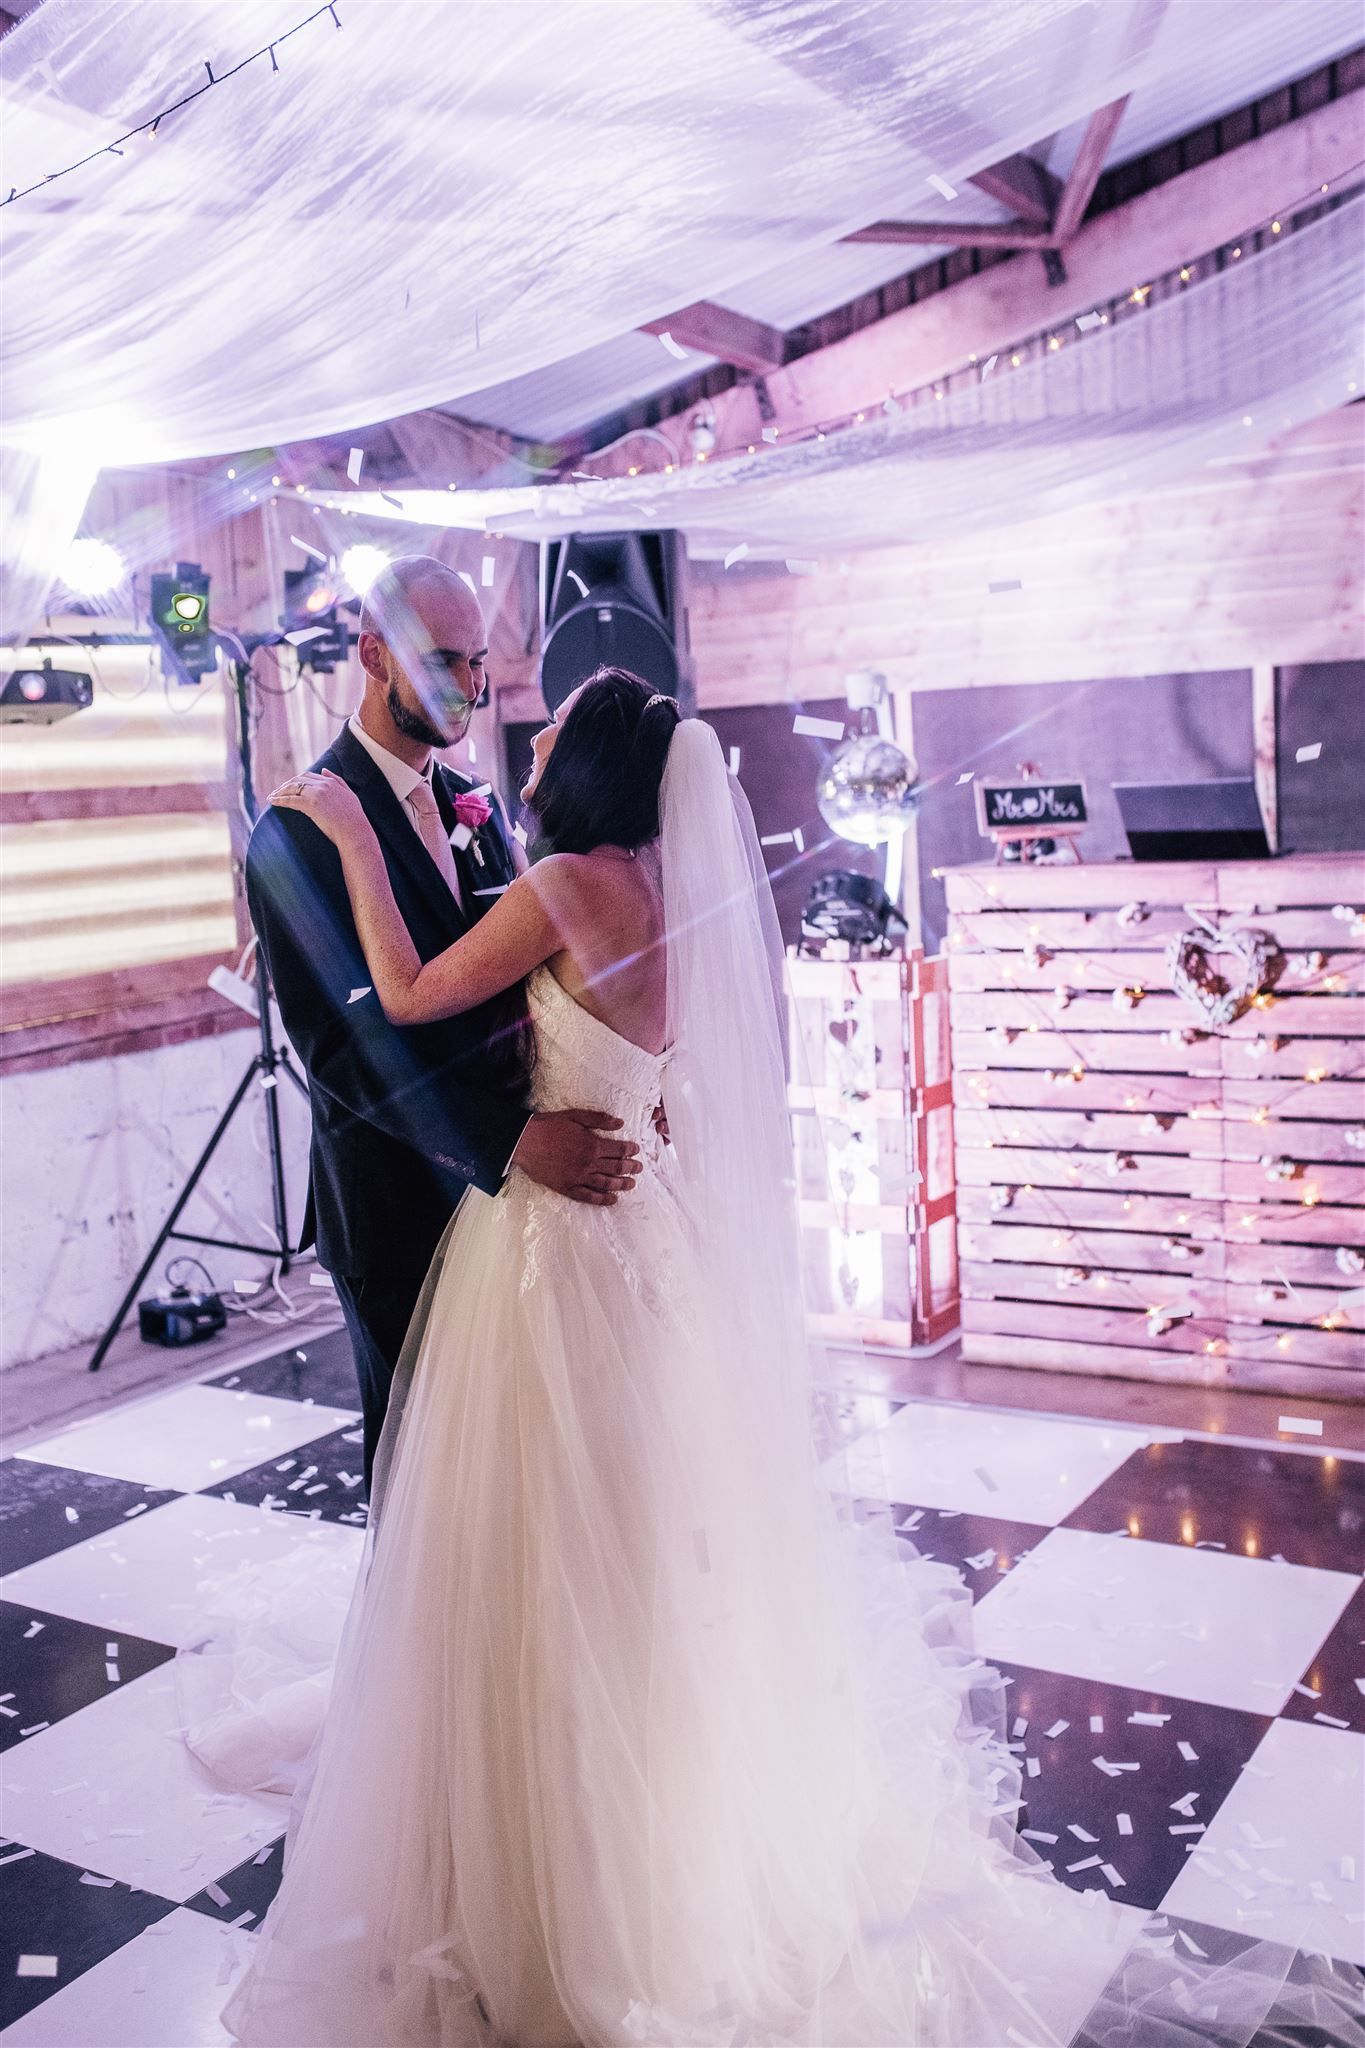 First dance on the dancefloor at Furtho Manor Farm with a rustic wooden DJ booth and a confetti canon has just been released with paper confetti surrounding the couple. Photo thanks to Francesca Checkley Photography.